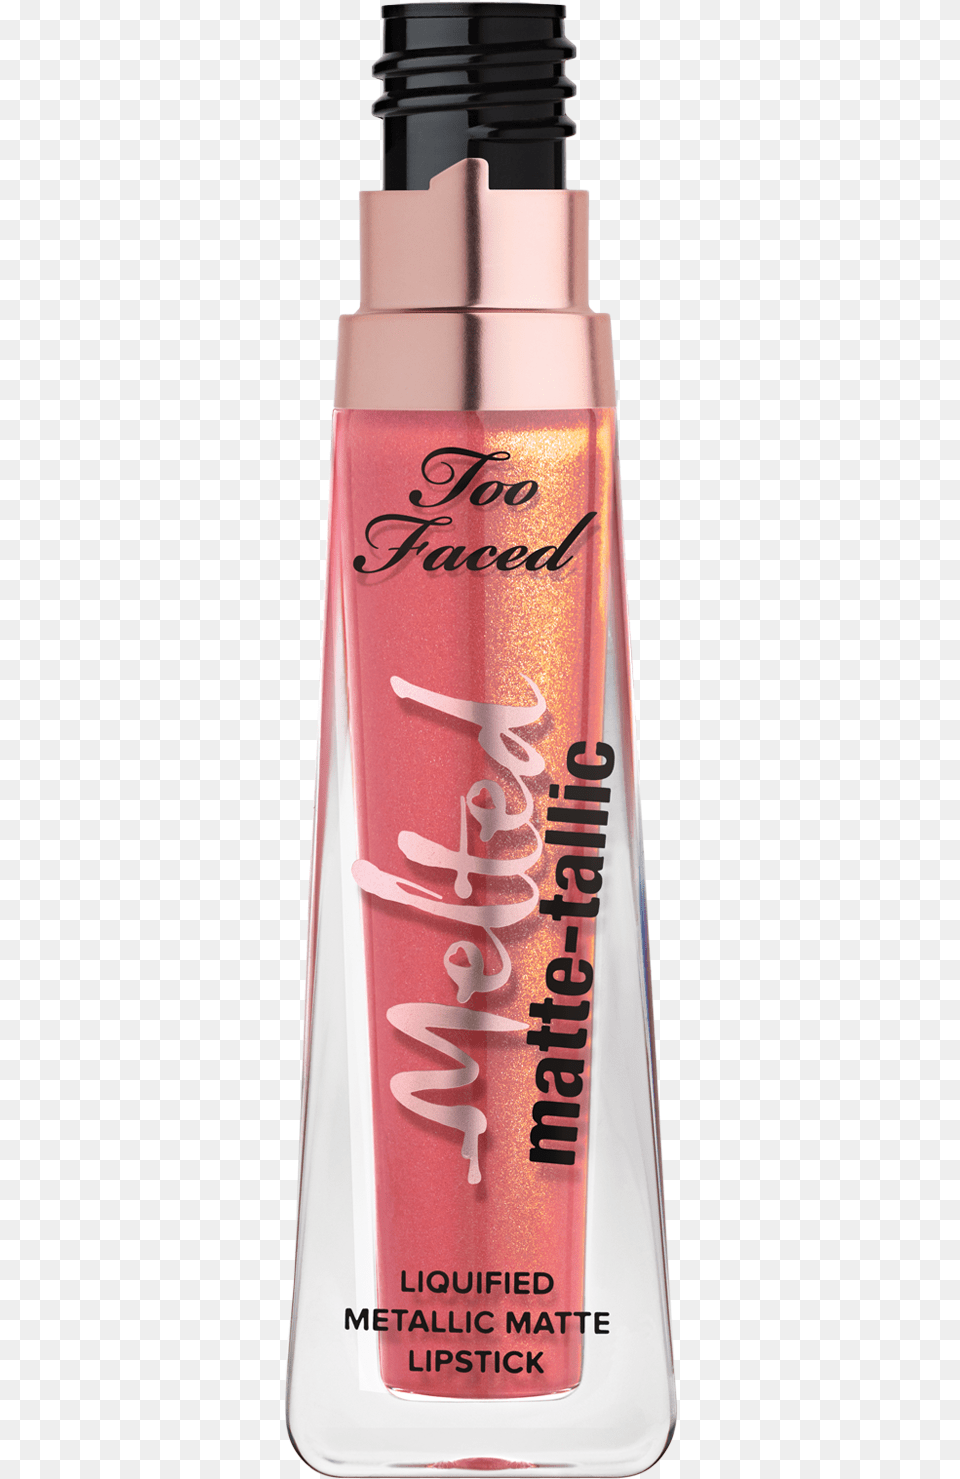 Melted Lip Gloss, Bottle, Cosmetics, Lotion, Alcohol Png